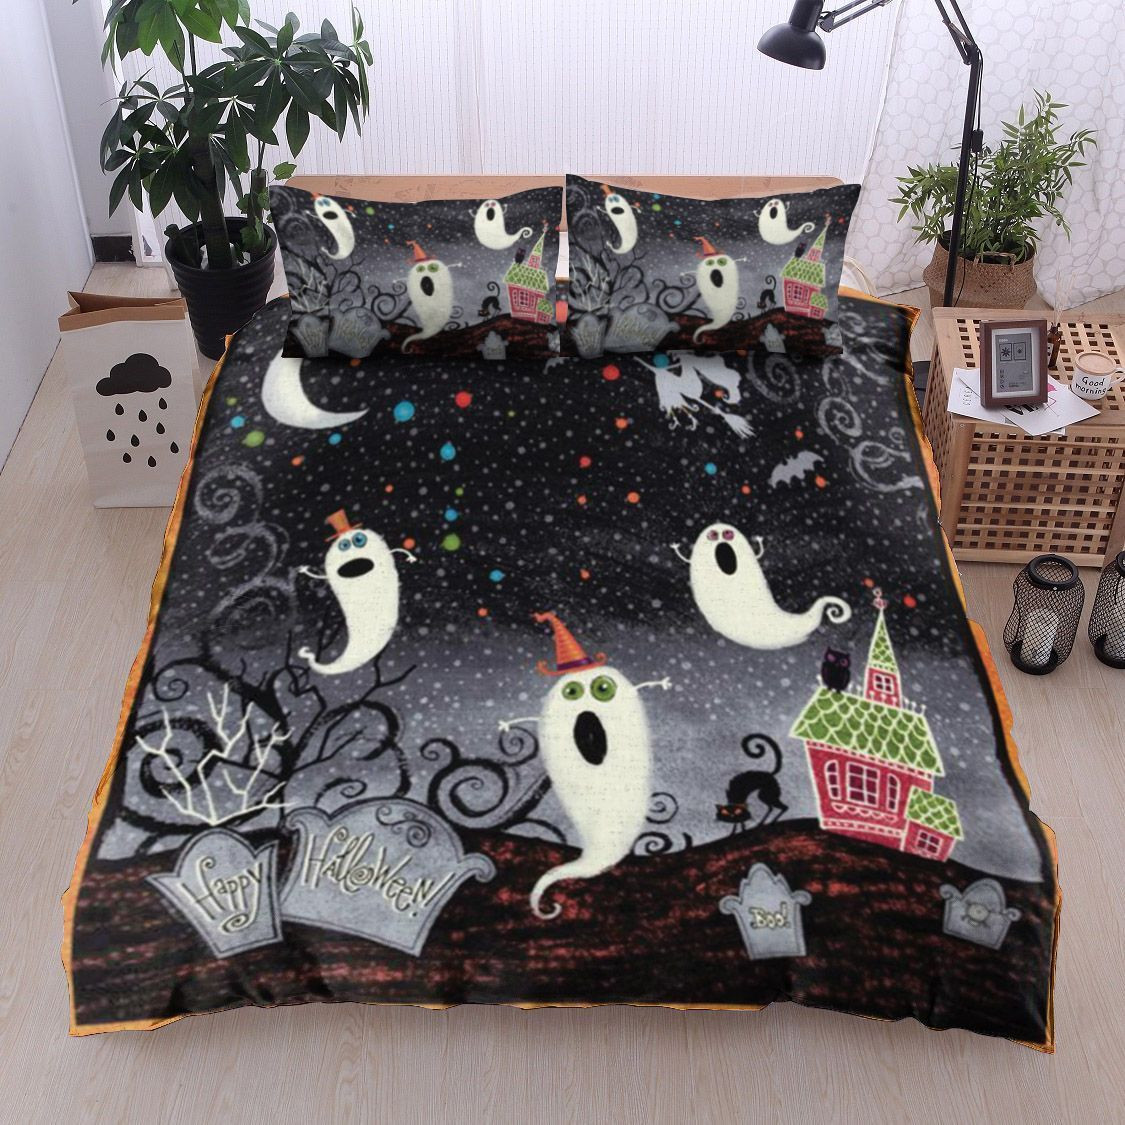 celebrate halloween with festive bed sheets and duvet cover set perfect presents for birthdays christmas and thanksgiving rusrm